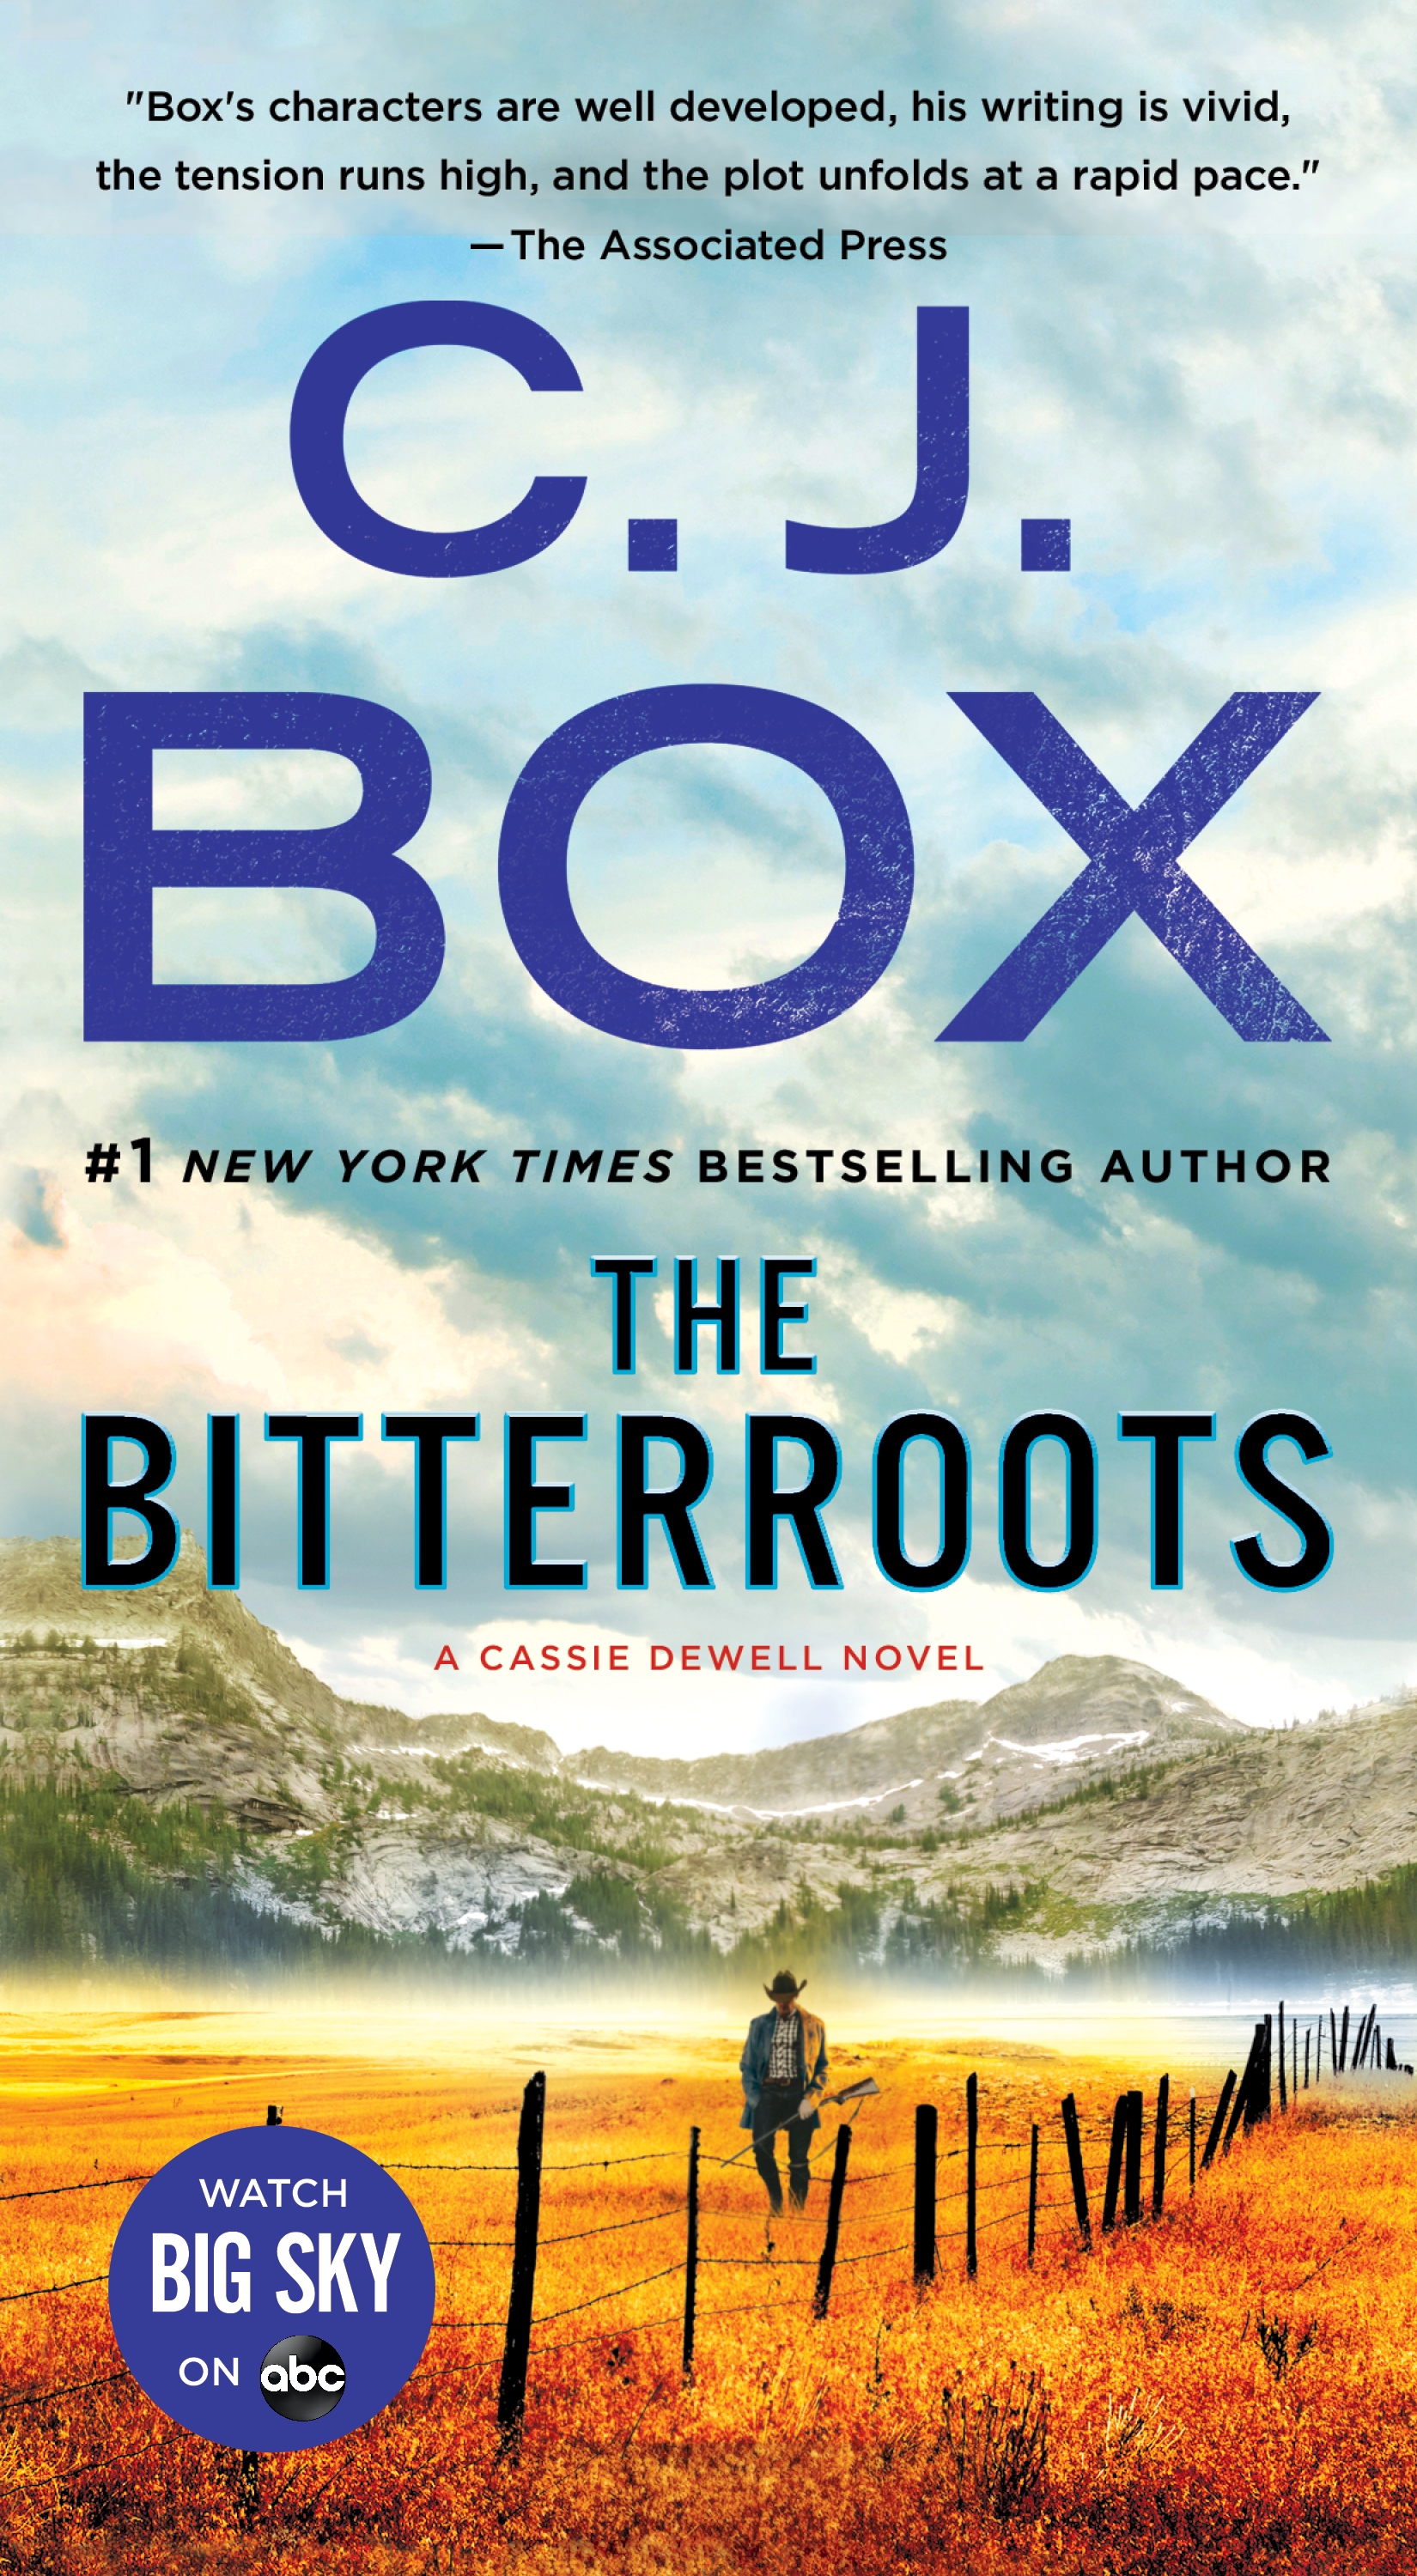 The Bitterroots A Cassie Dewell Novel cover image